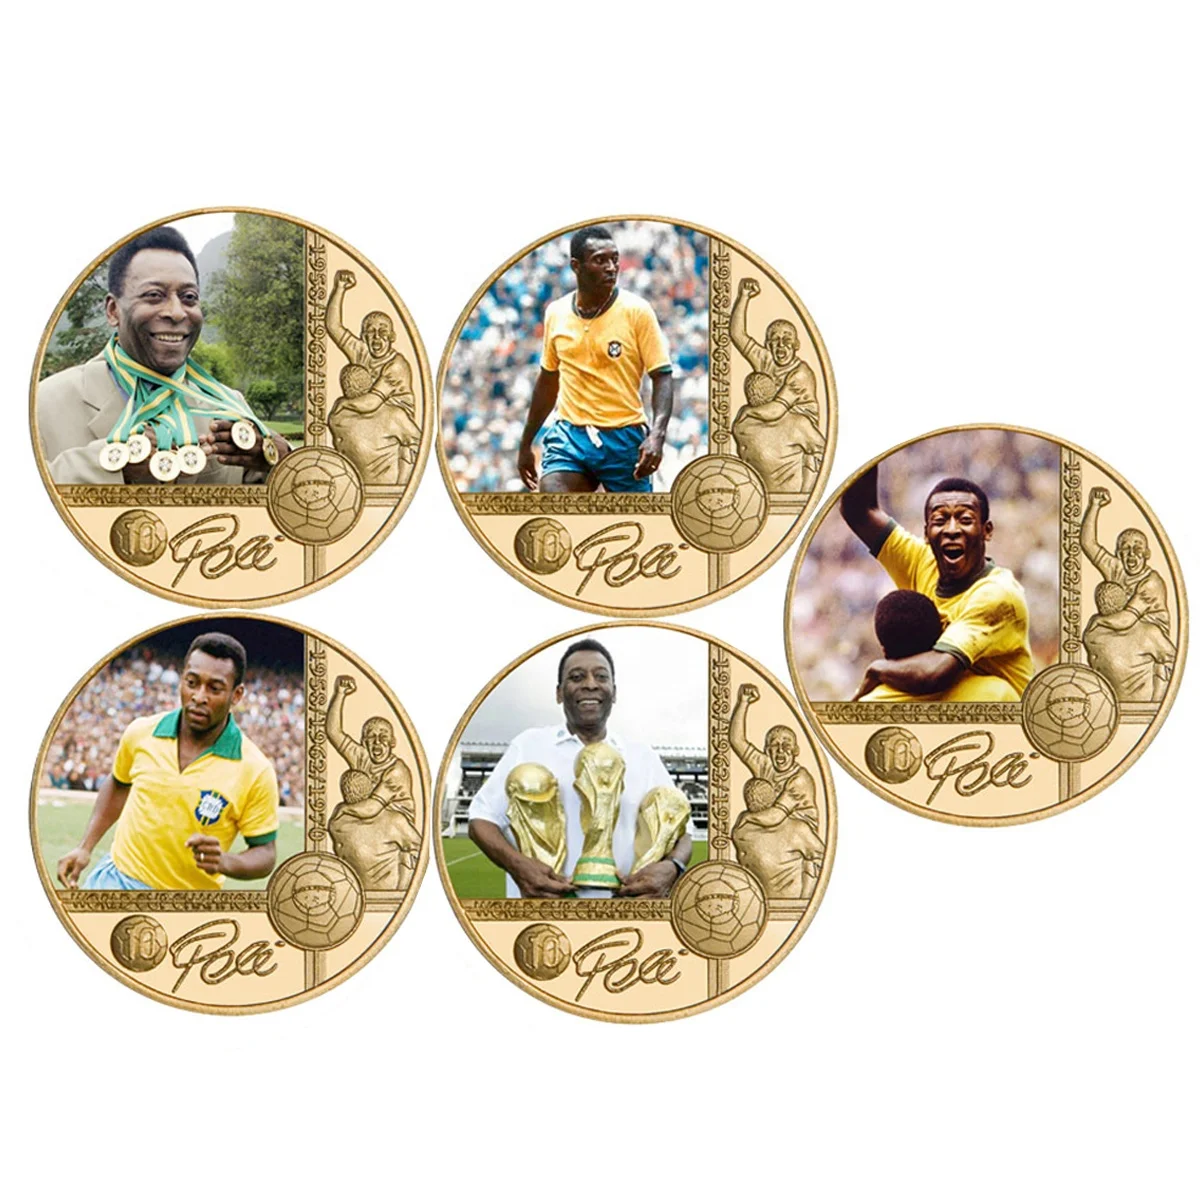 

Hot Sale The King Of Football Pele Gold Commemorative Coin In Memory Of Pele Custom Coins Souvenir Gift For Fans